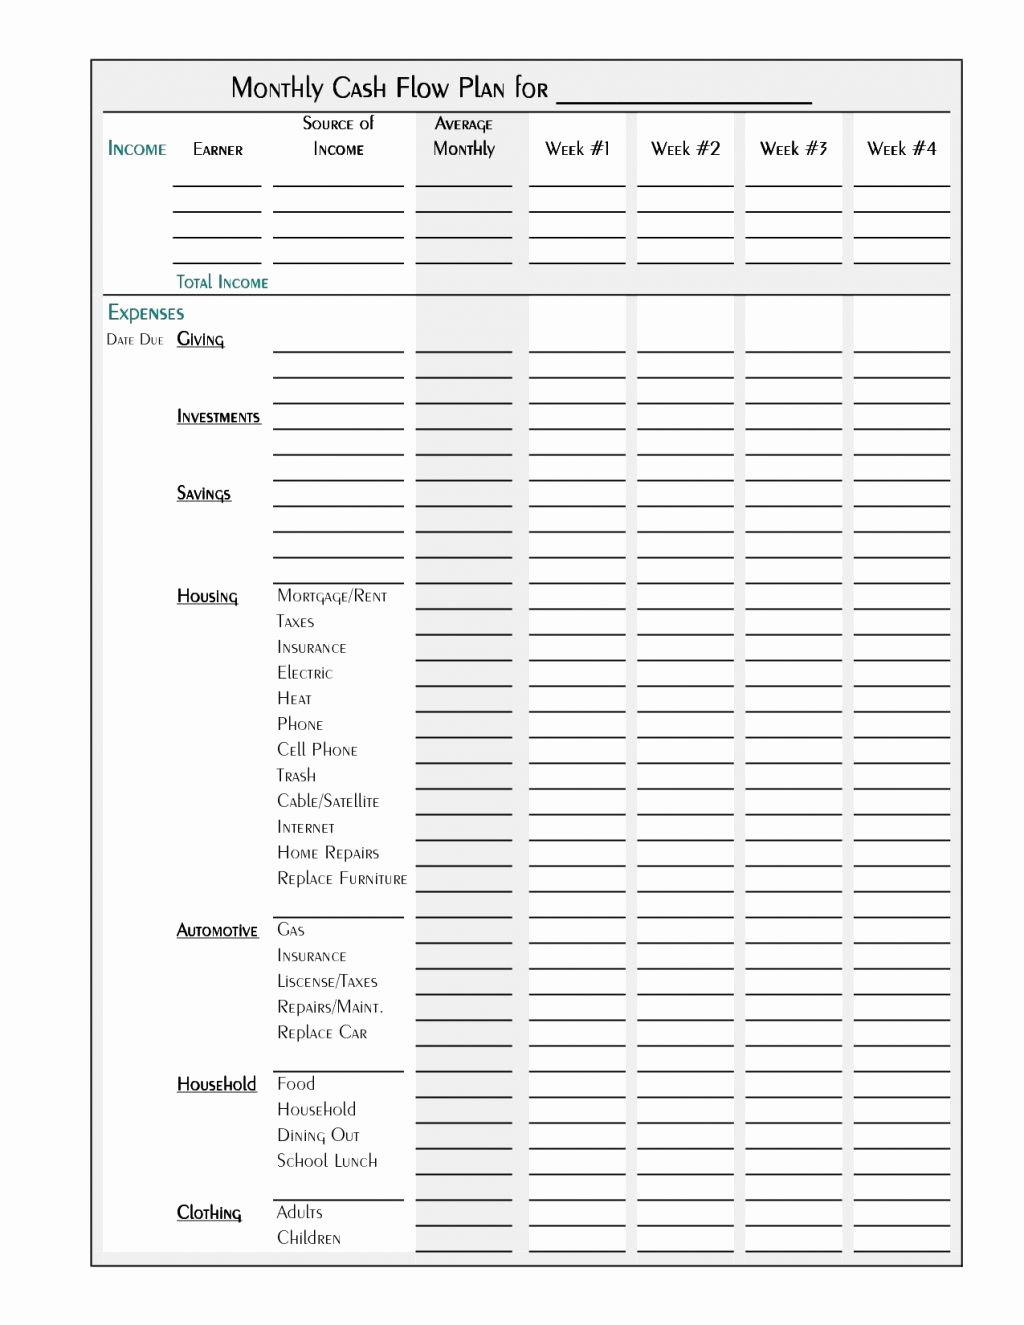 Monthly Retirement Planning Worksheet Answers For Retirement Within Monthly Retirement Planning Worksheet Answers